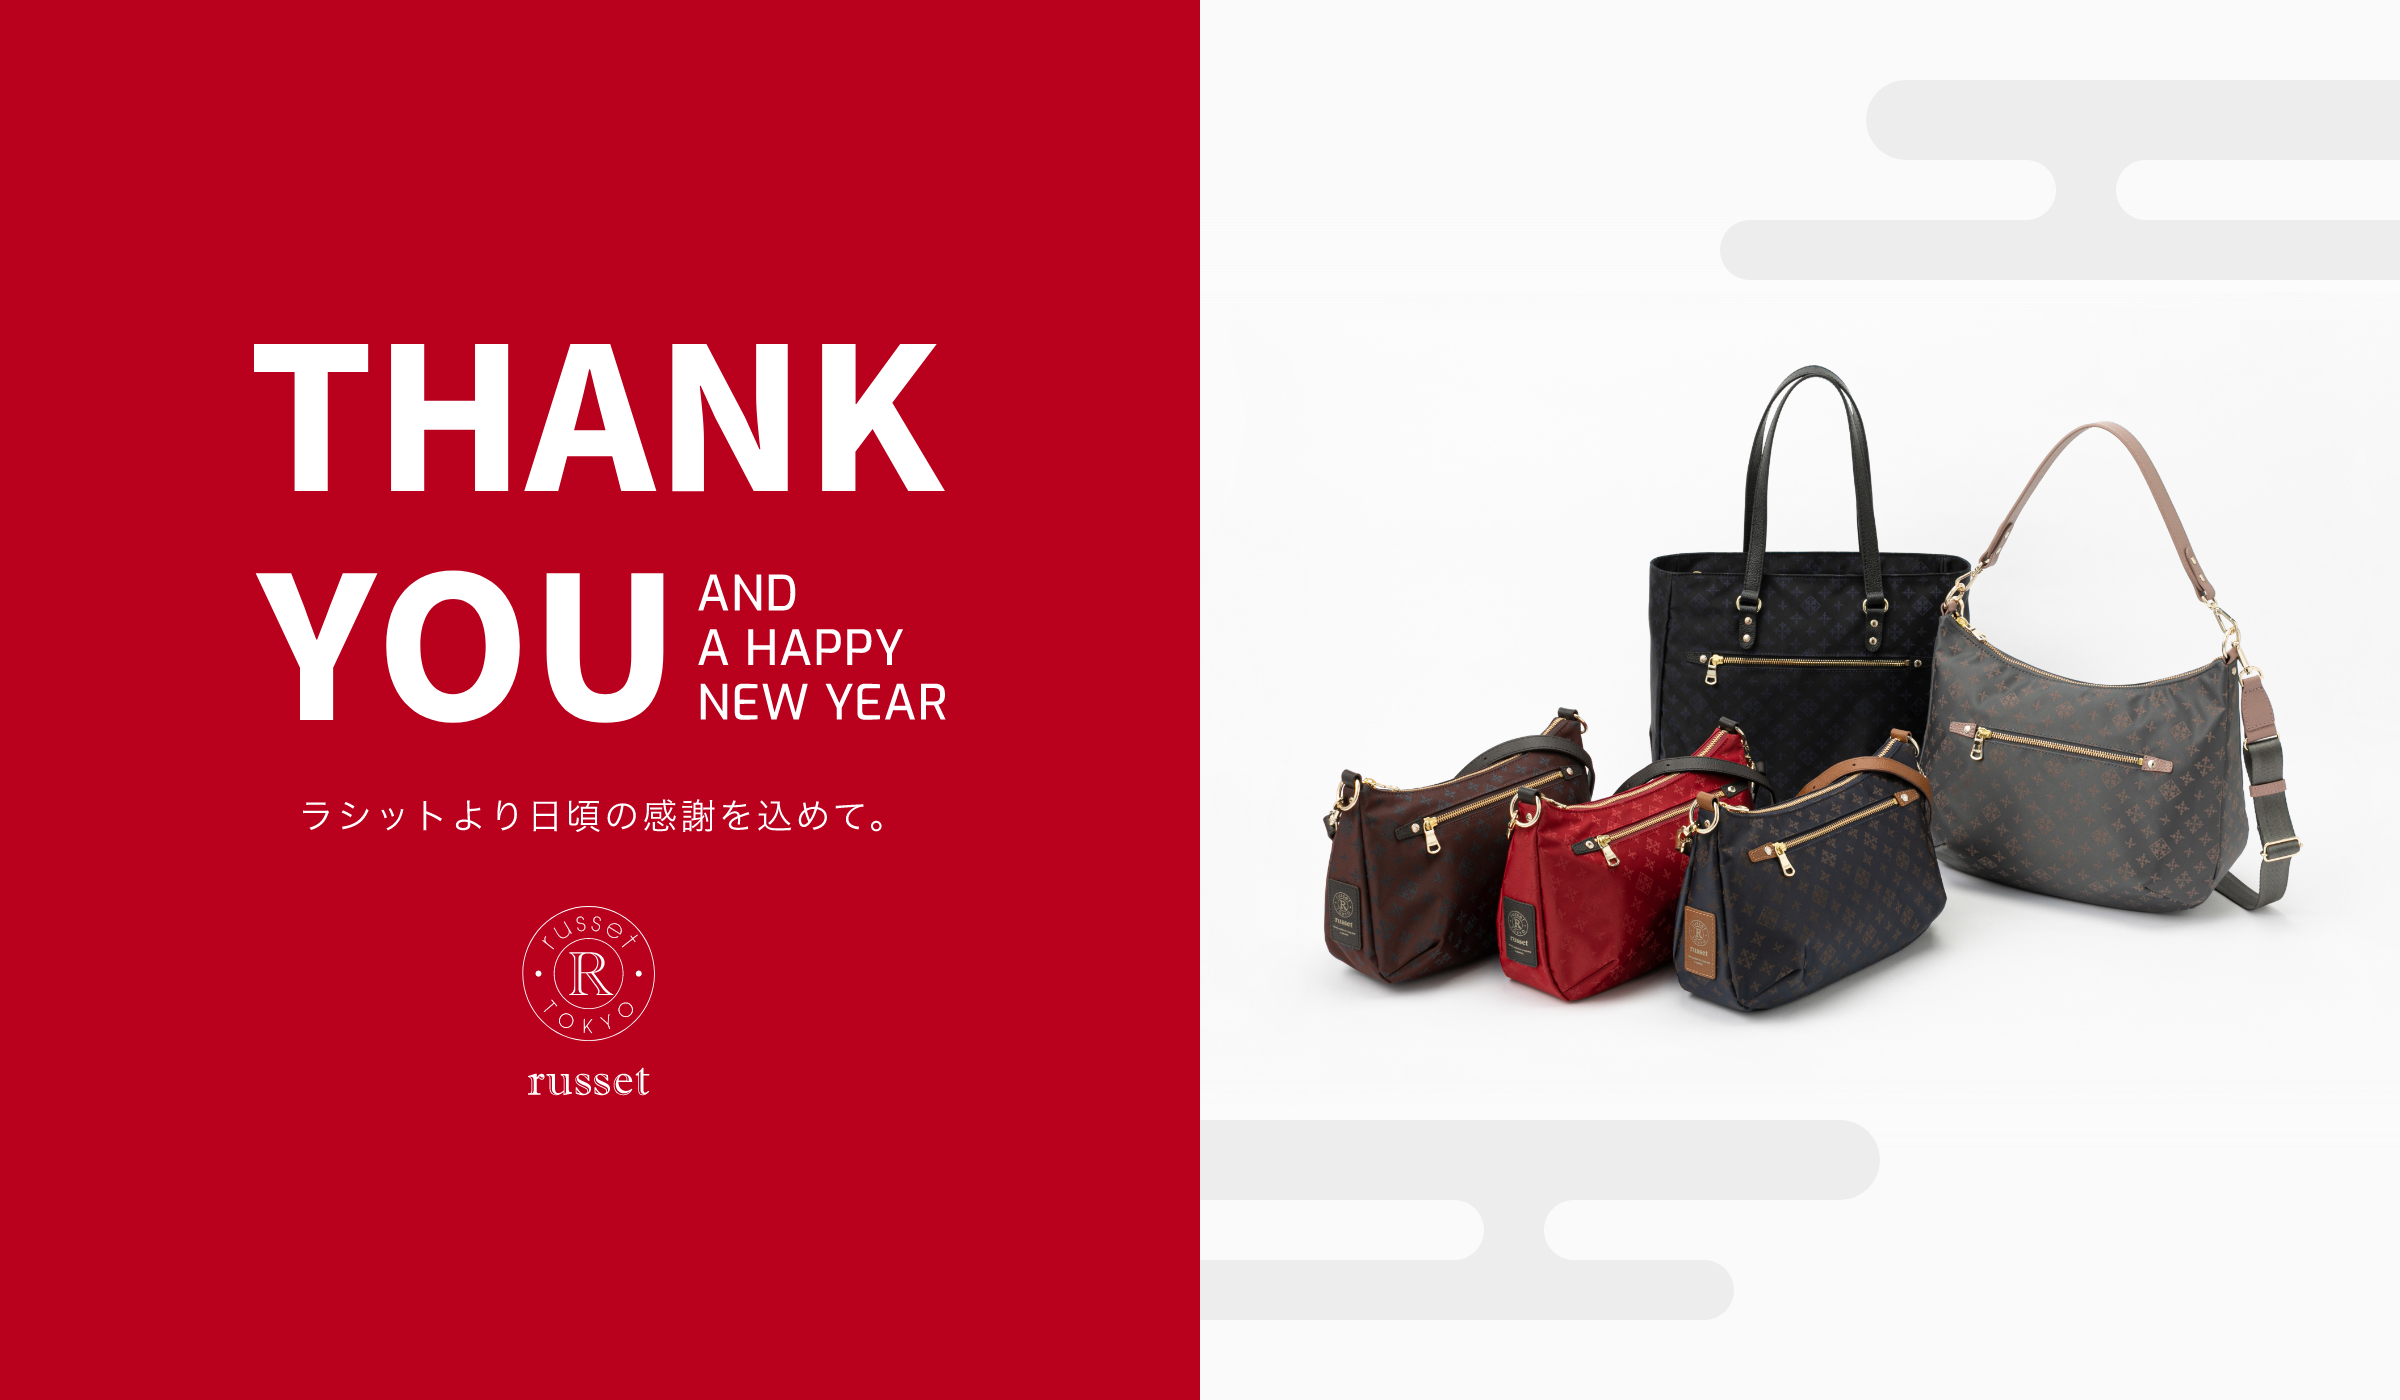 THANK YOU AND A HAPPY NEW YEAR　ラシットより日頃の感謝を込めて russet